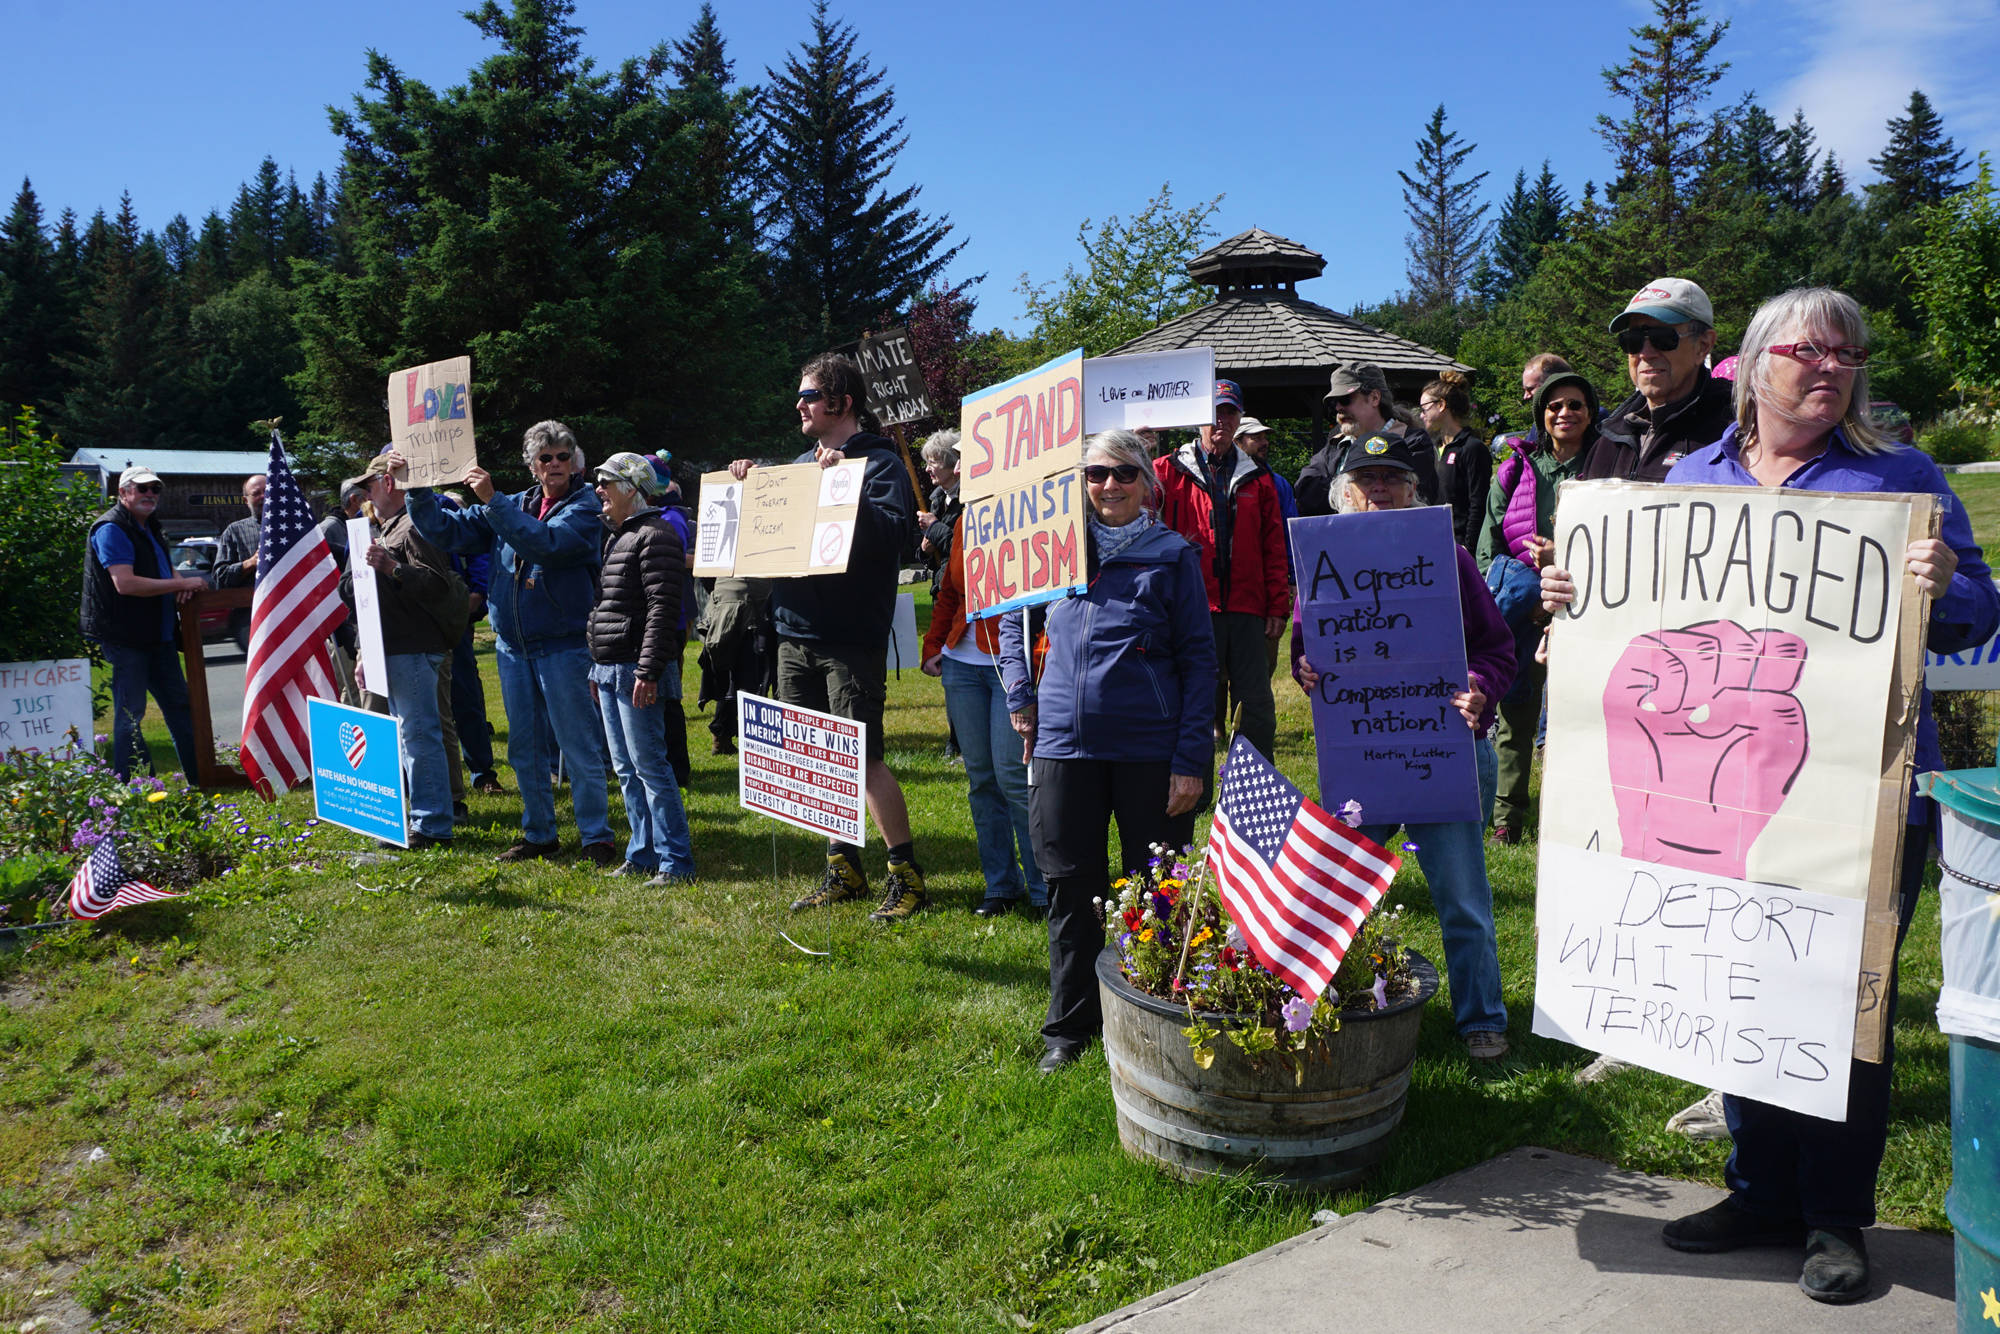 People demonstrating against the events of Charlottesville, Va., and other white supremacist rallies stand up against racism at WKFL Park in Homer on Sunday afternoon. About 50 people attended the one-hour event held from 3-4 p.m. Sunday, Aug. 13, 2017 in Homer, Alaska. (Photo by Michael Armstrong, Homer News)